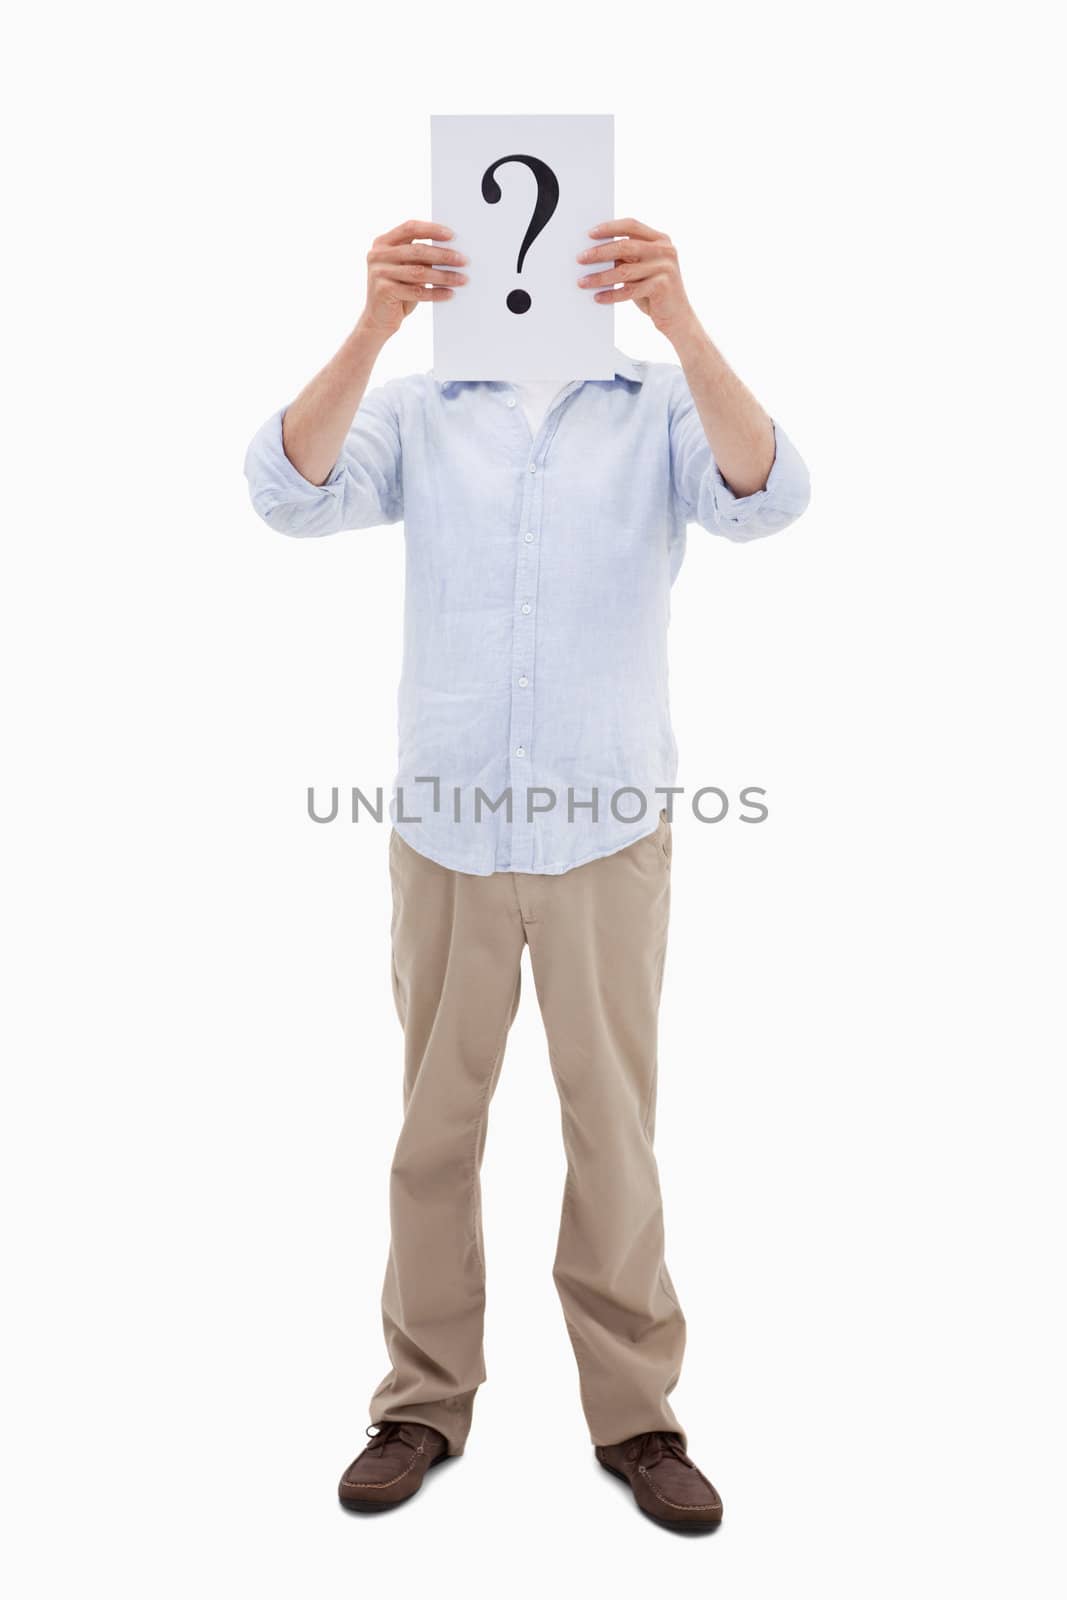 Portrait of a man holding a question mark on a paper against a white background